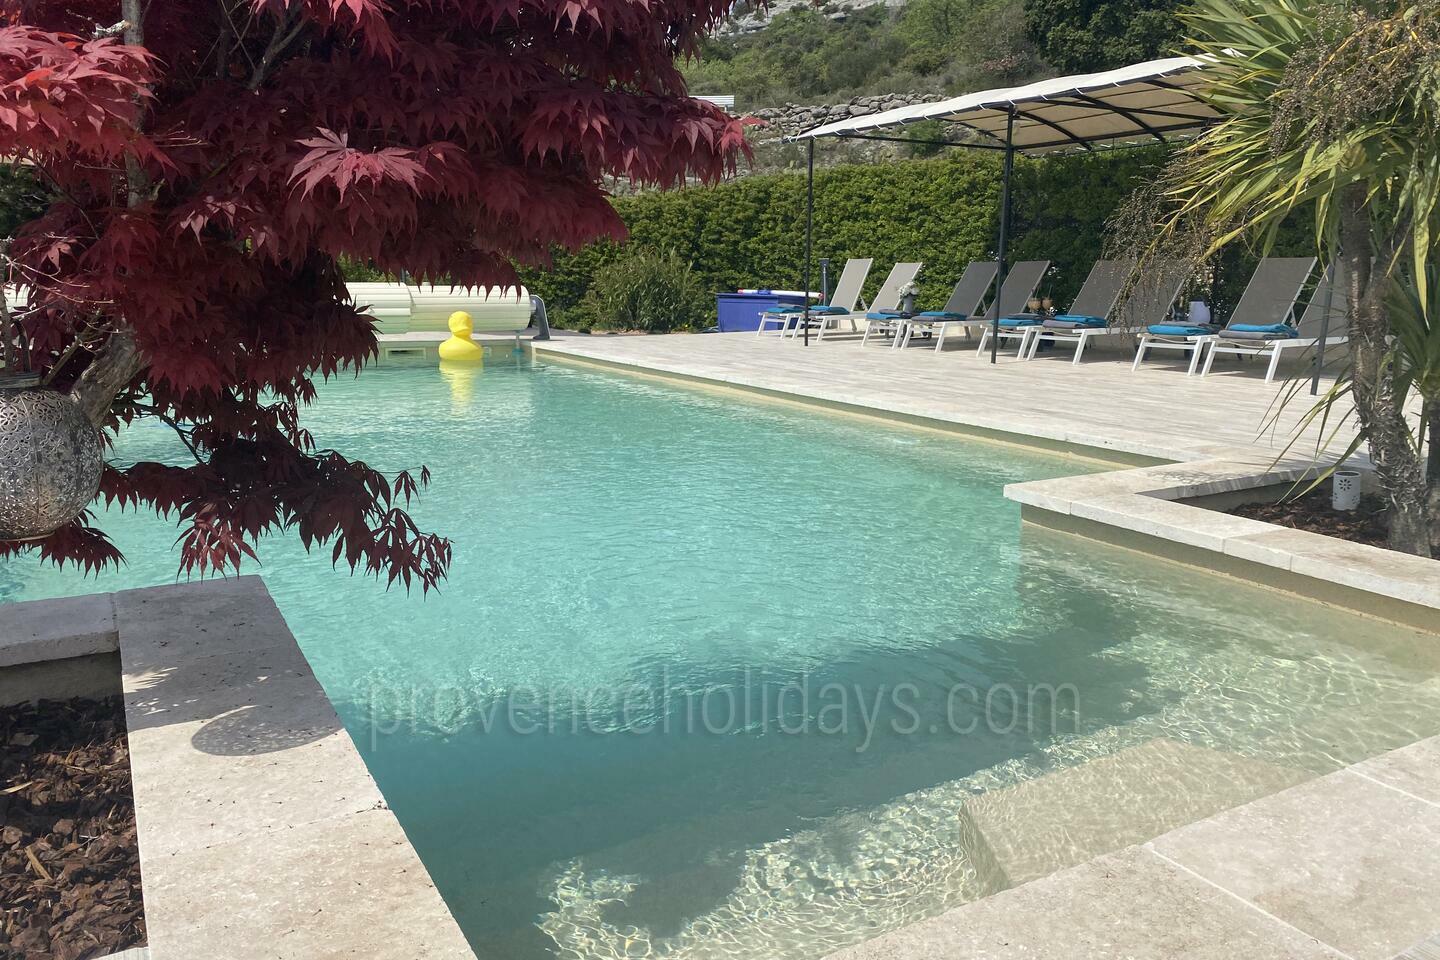 2 - Recently restored bastide with heated swimming pool: Villa: Pool